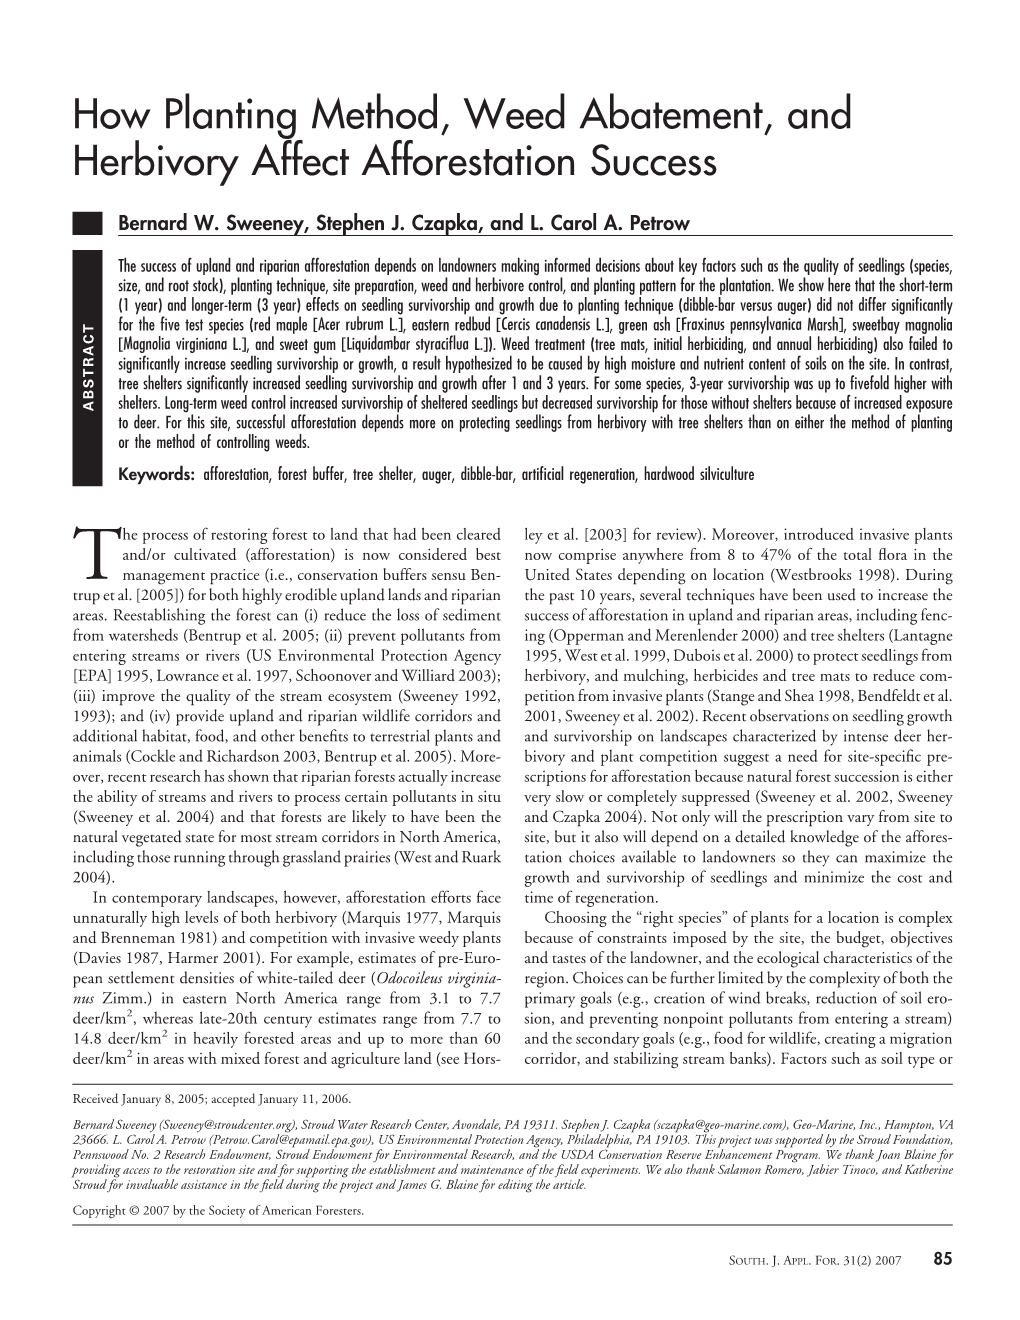 How Planting Method, Weed Abatement, and Herbivory Affect Afforestation Success